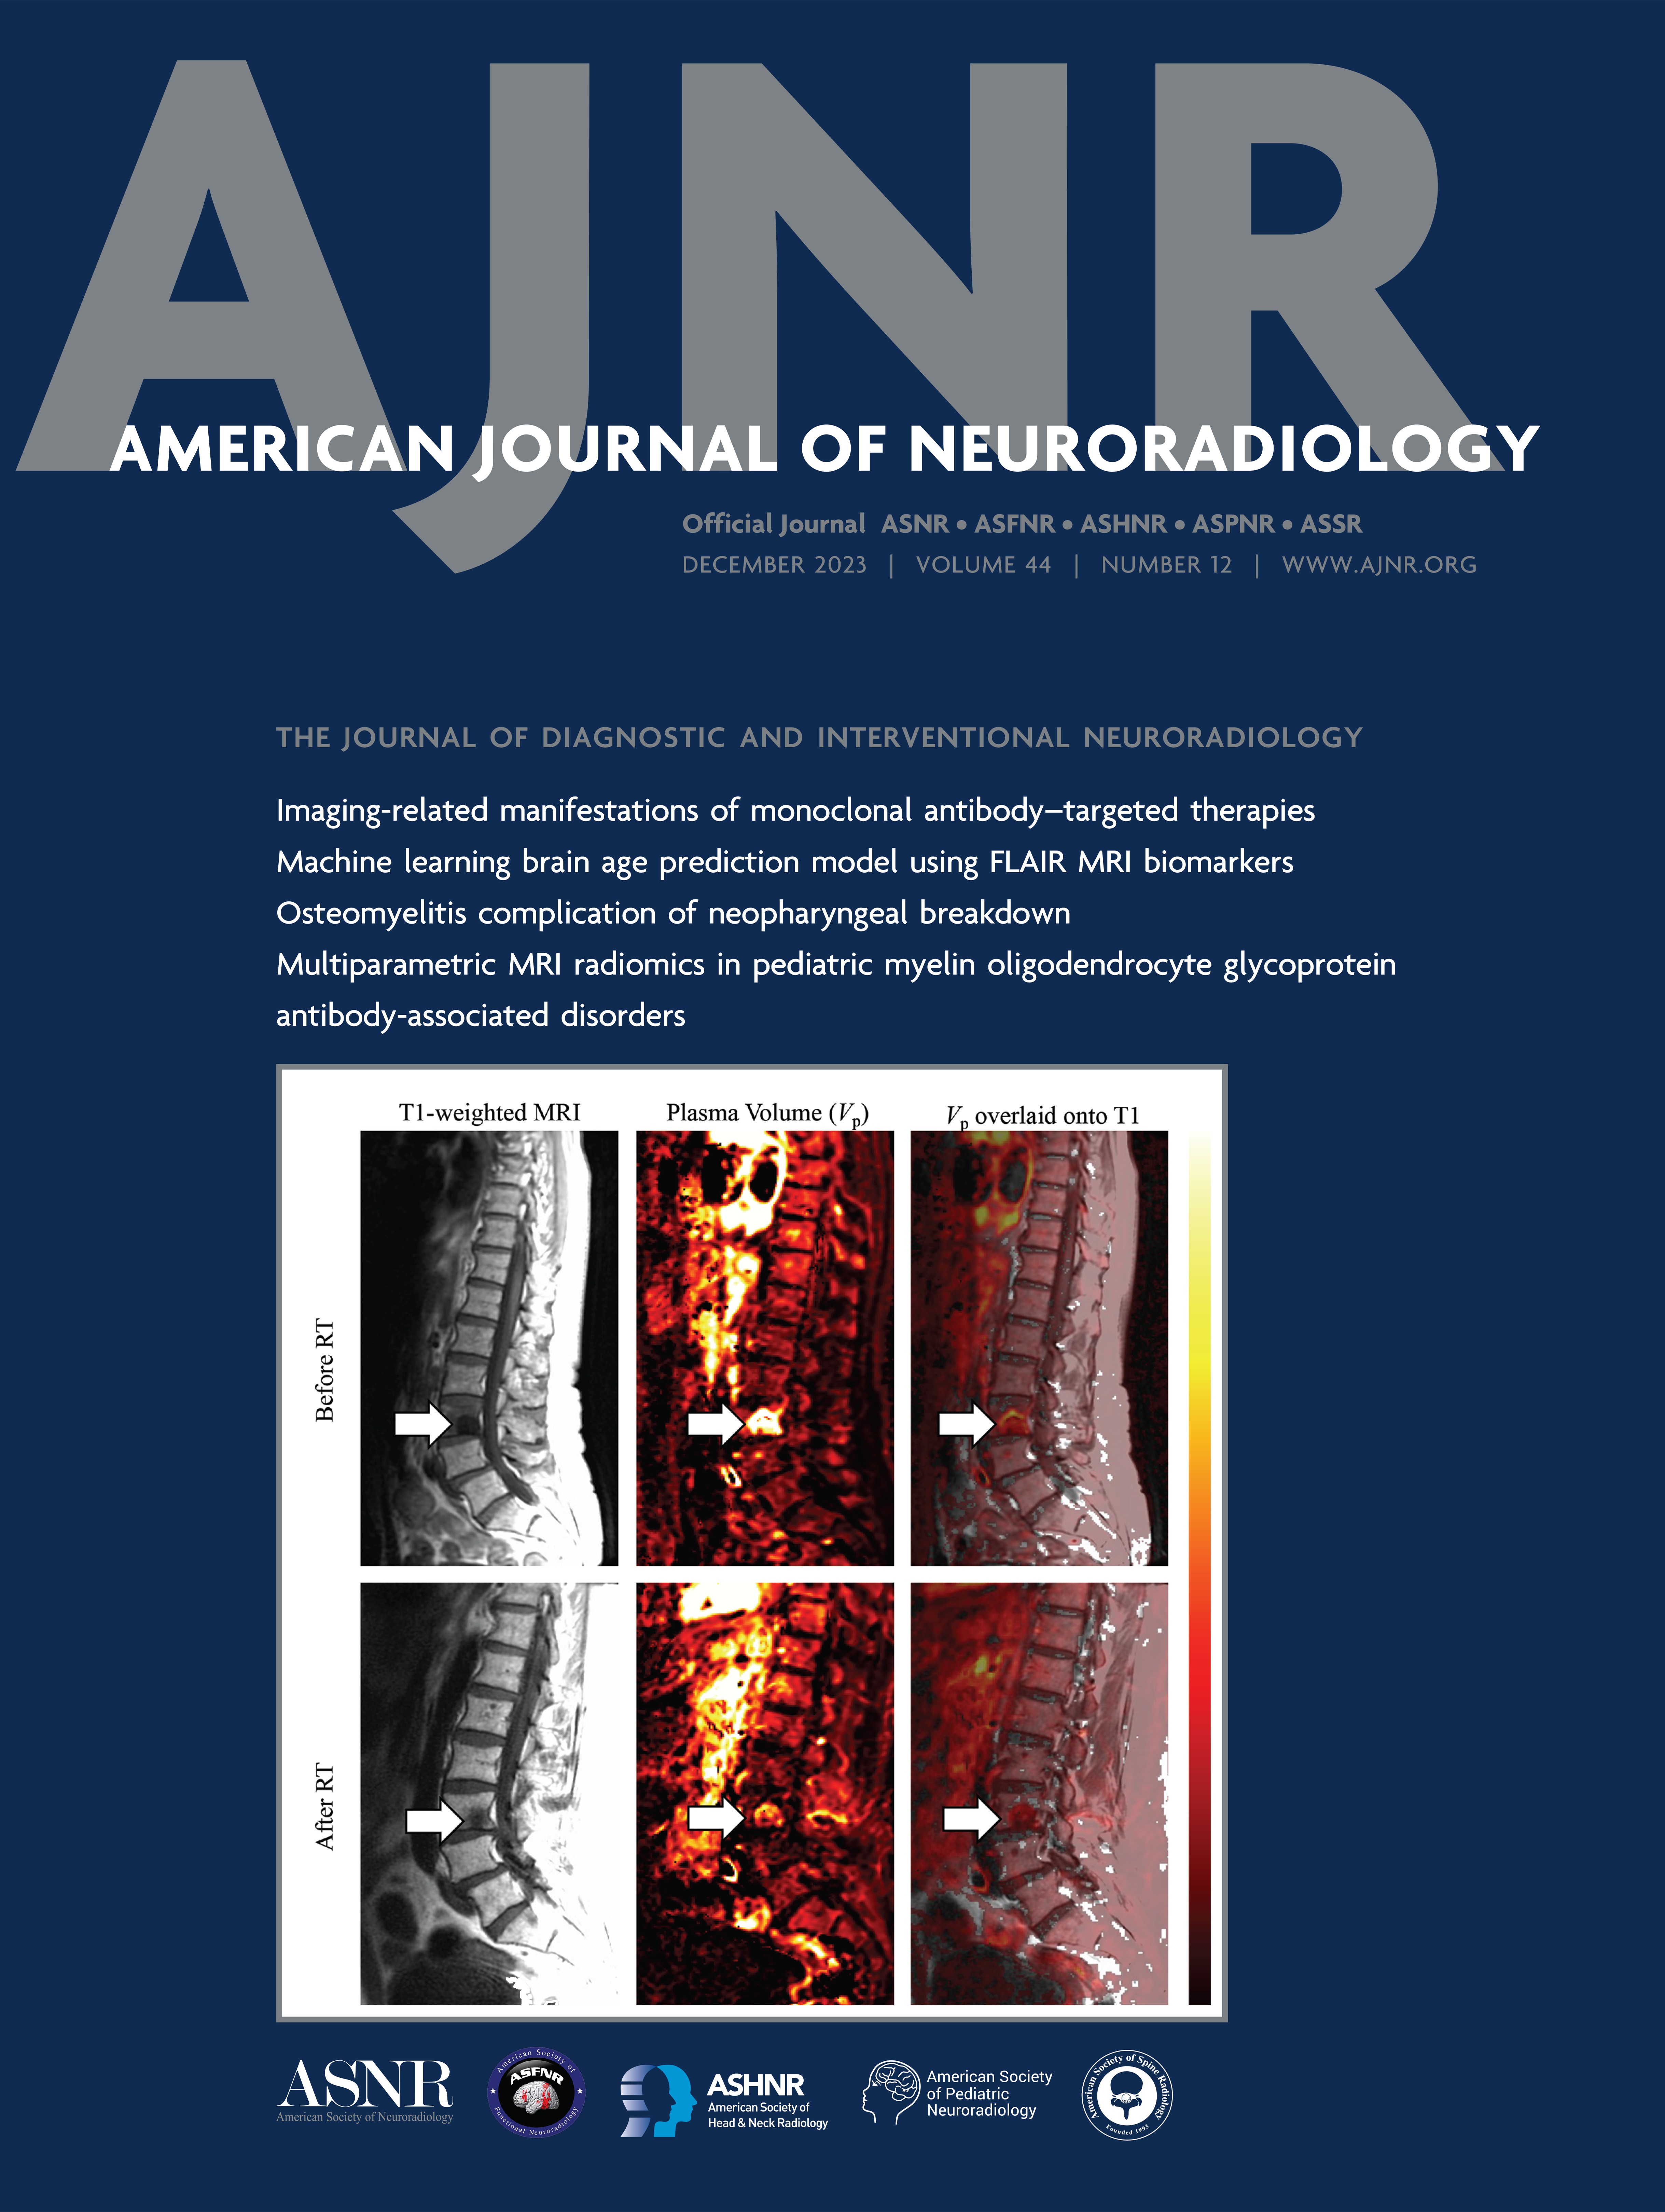 Brain Abnormalities in Becker Muscular Dystrophy: Evaluation by Voxel-Based DTI and Morphometric Analysis [NEURODEGENERATIVE DISORDER IMAGING]